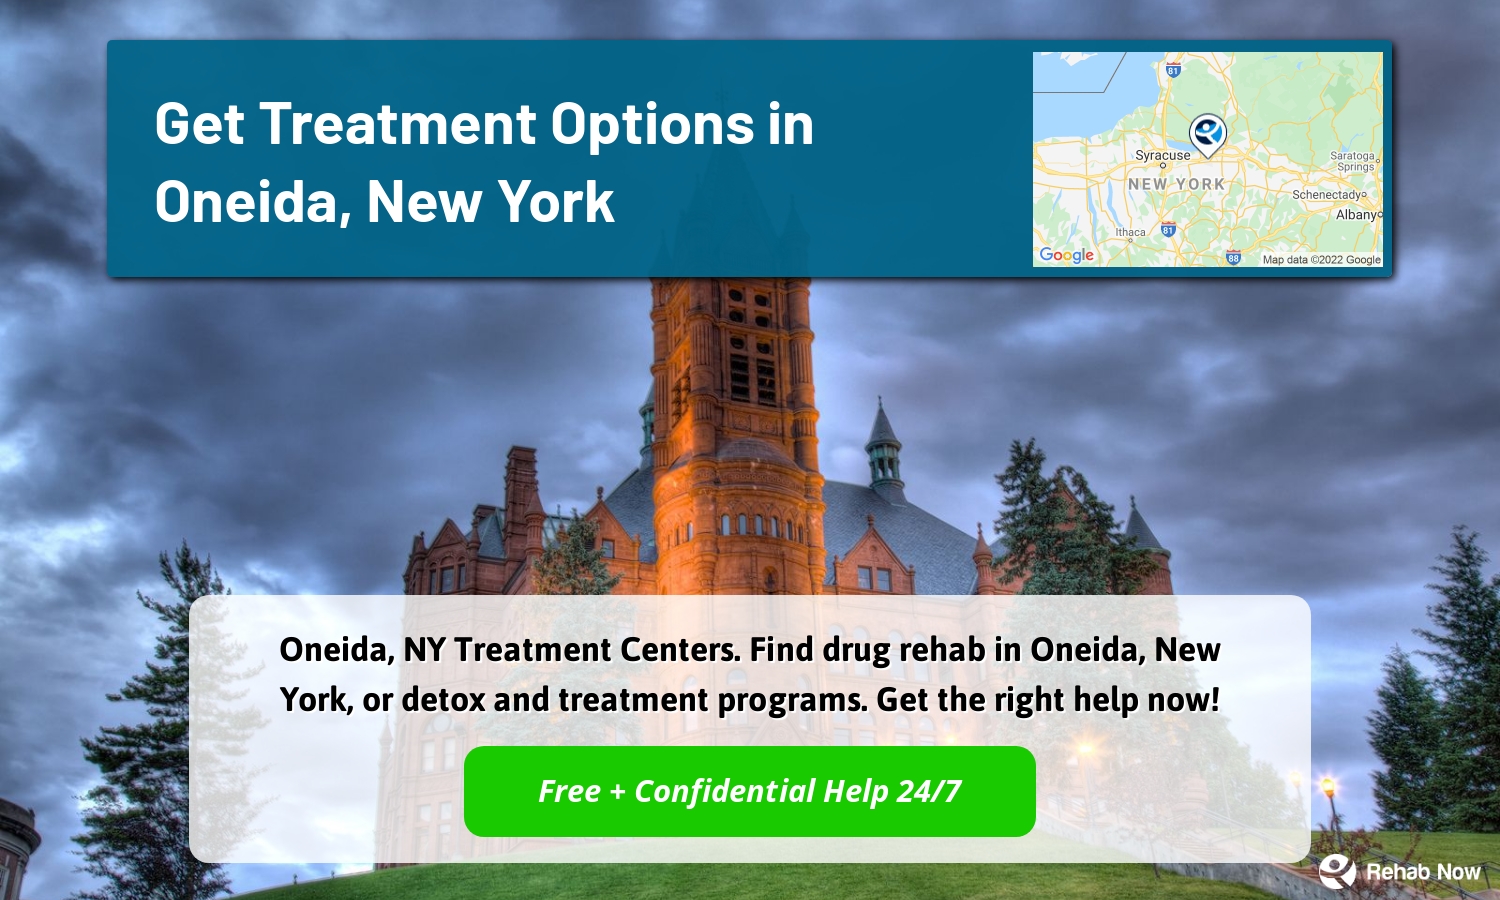 Oneida, NY Treatment Centers. Find drug rehab in Oneida, New York, or detox and treatment programs. Get the right help now!